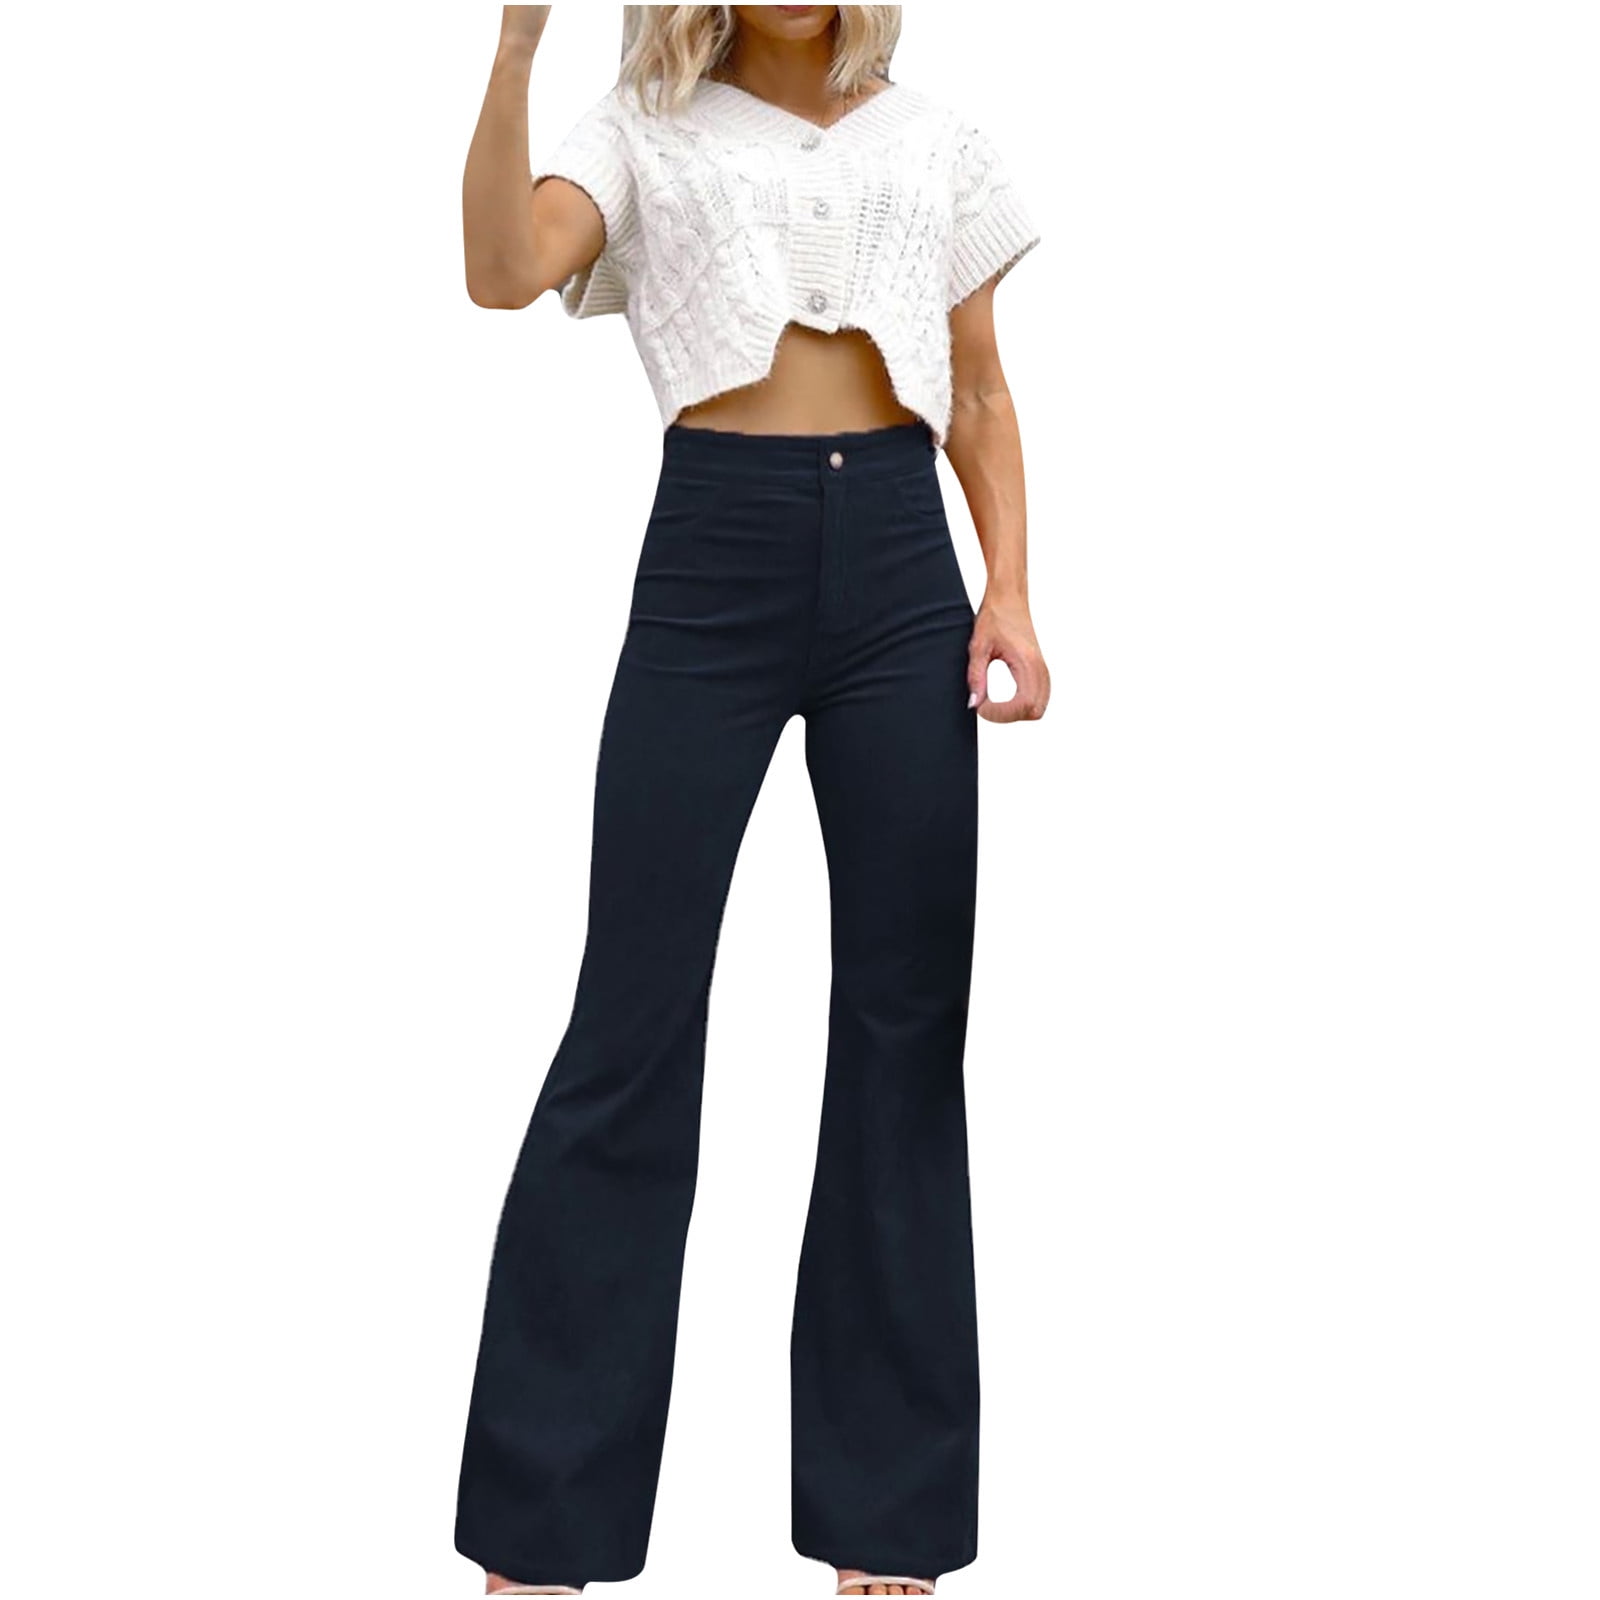 Mrat Women Casual Work Pants Full Length Pants Ladies Fashion Slim Fit  Comfortable Solid Color Pocket Casual Flared Pants Female Pants Outfits  Navy L 